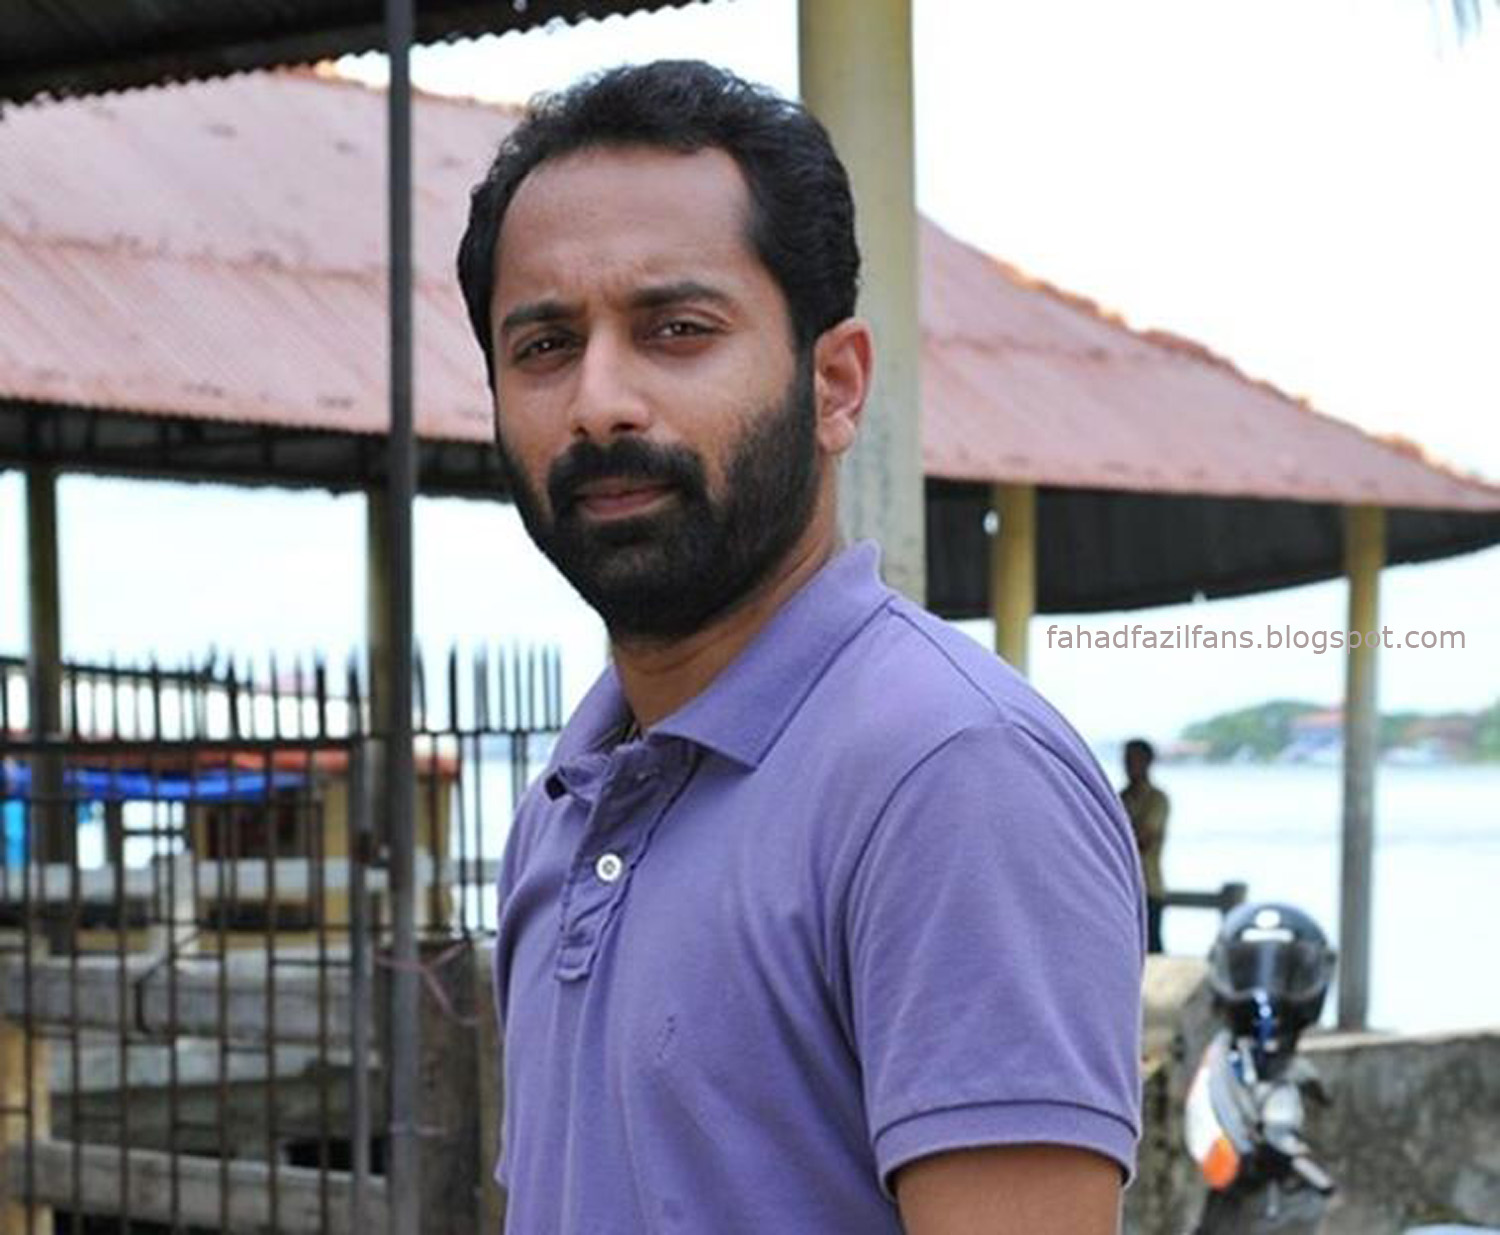 Fahadh Faasil's Top Performances That You Can't Miss - Sefisoft